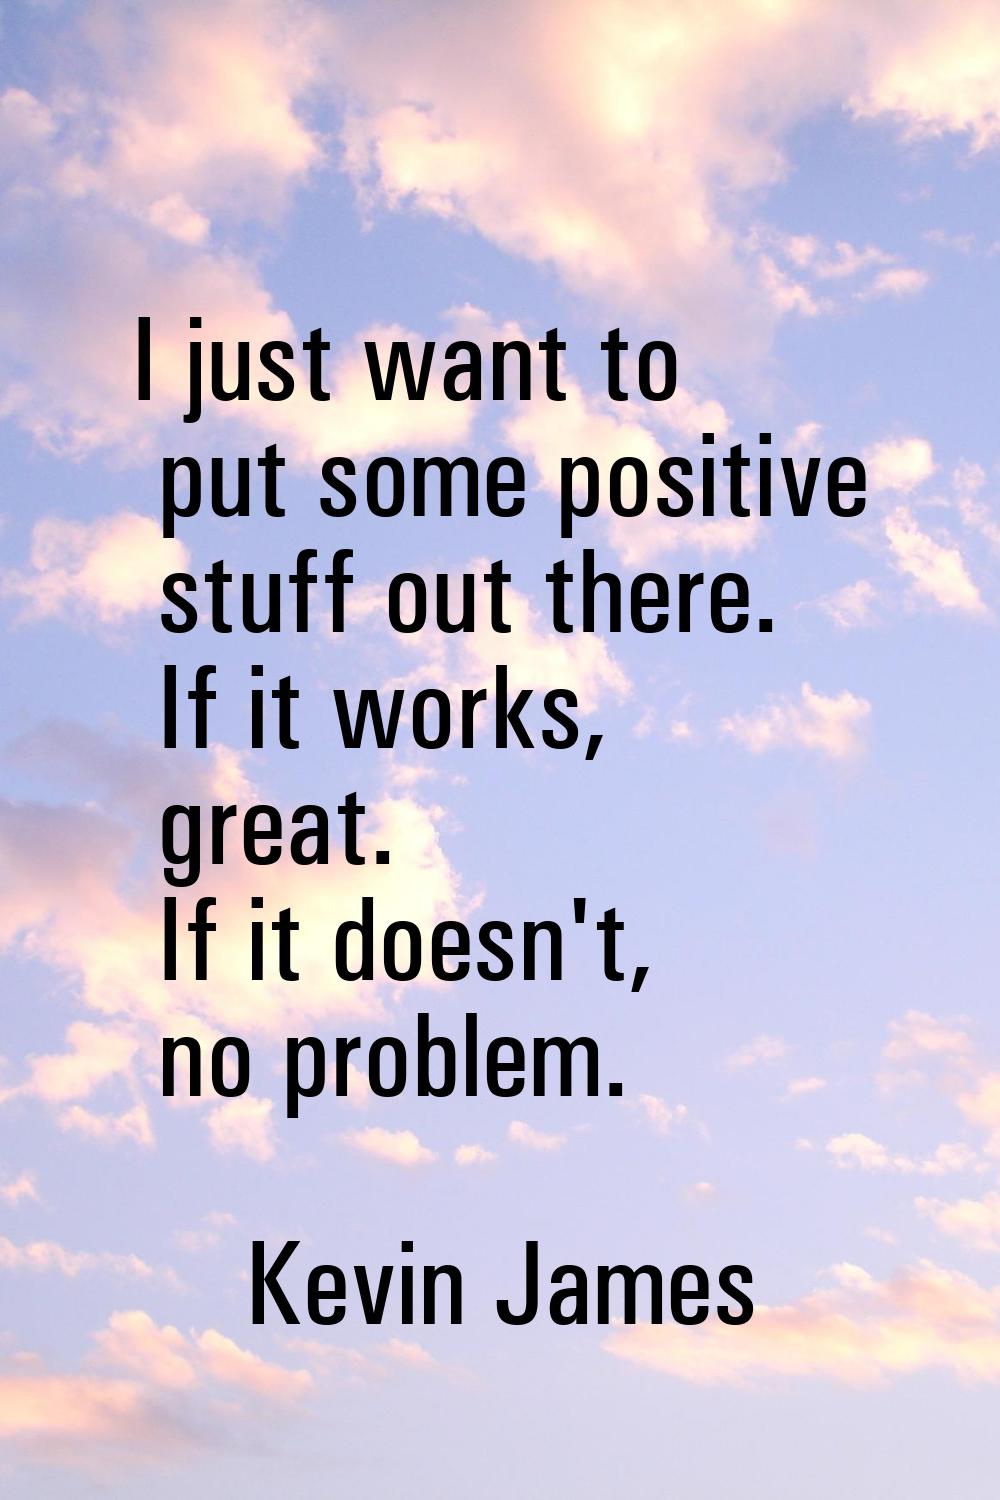 I just want to put some positive stuff out there. If it works, great. If it doesn't, no problem.